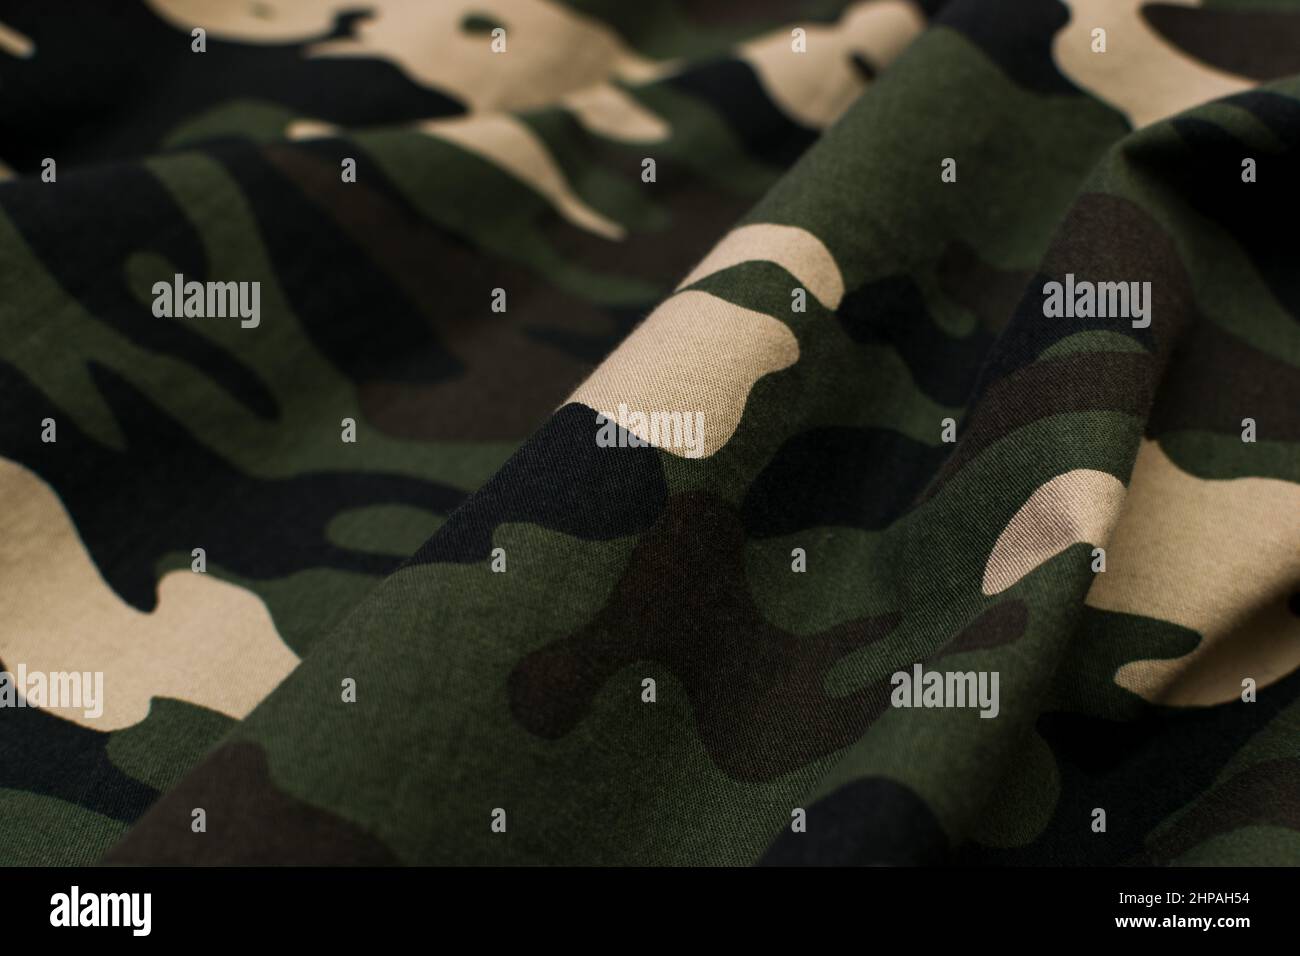 Military camouflage green, black, brown and beige uniform, background Stock Photo